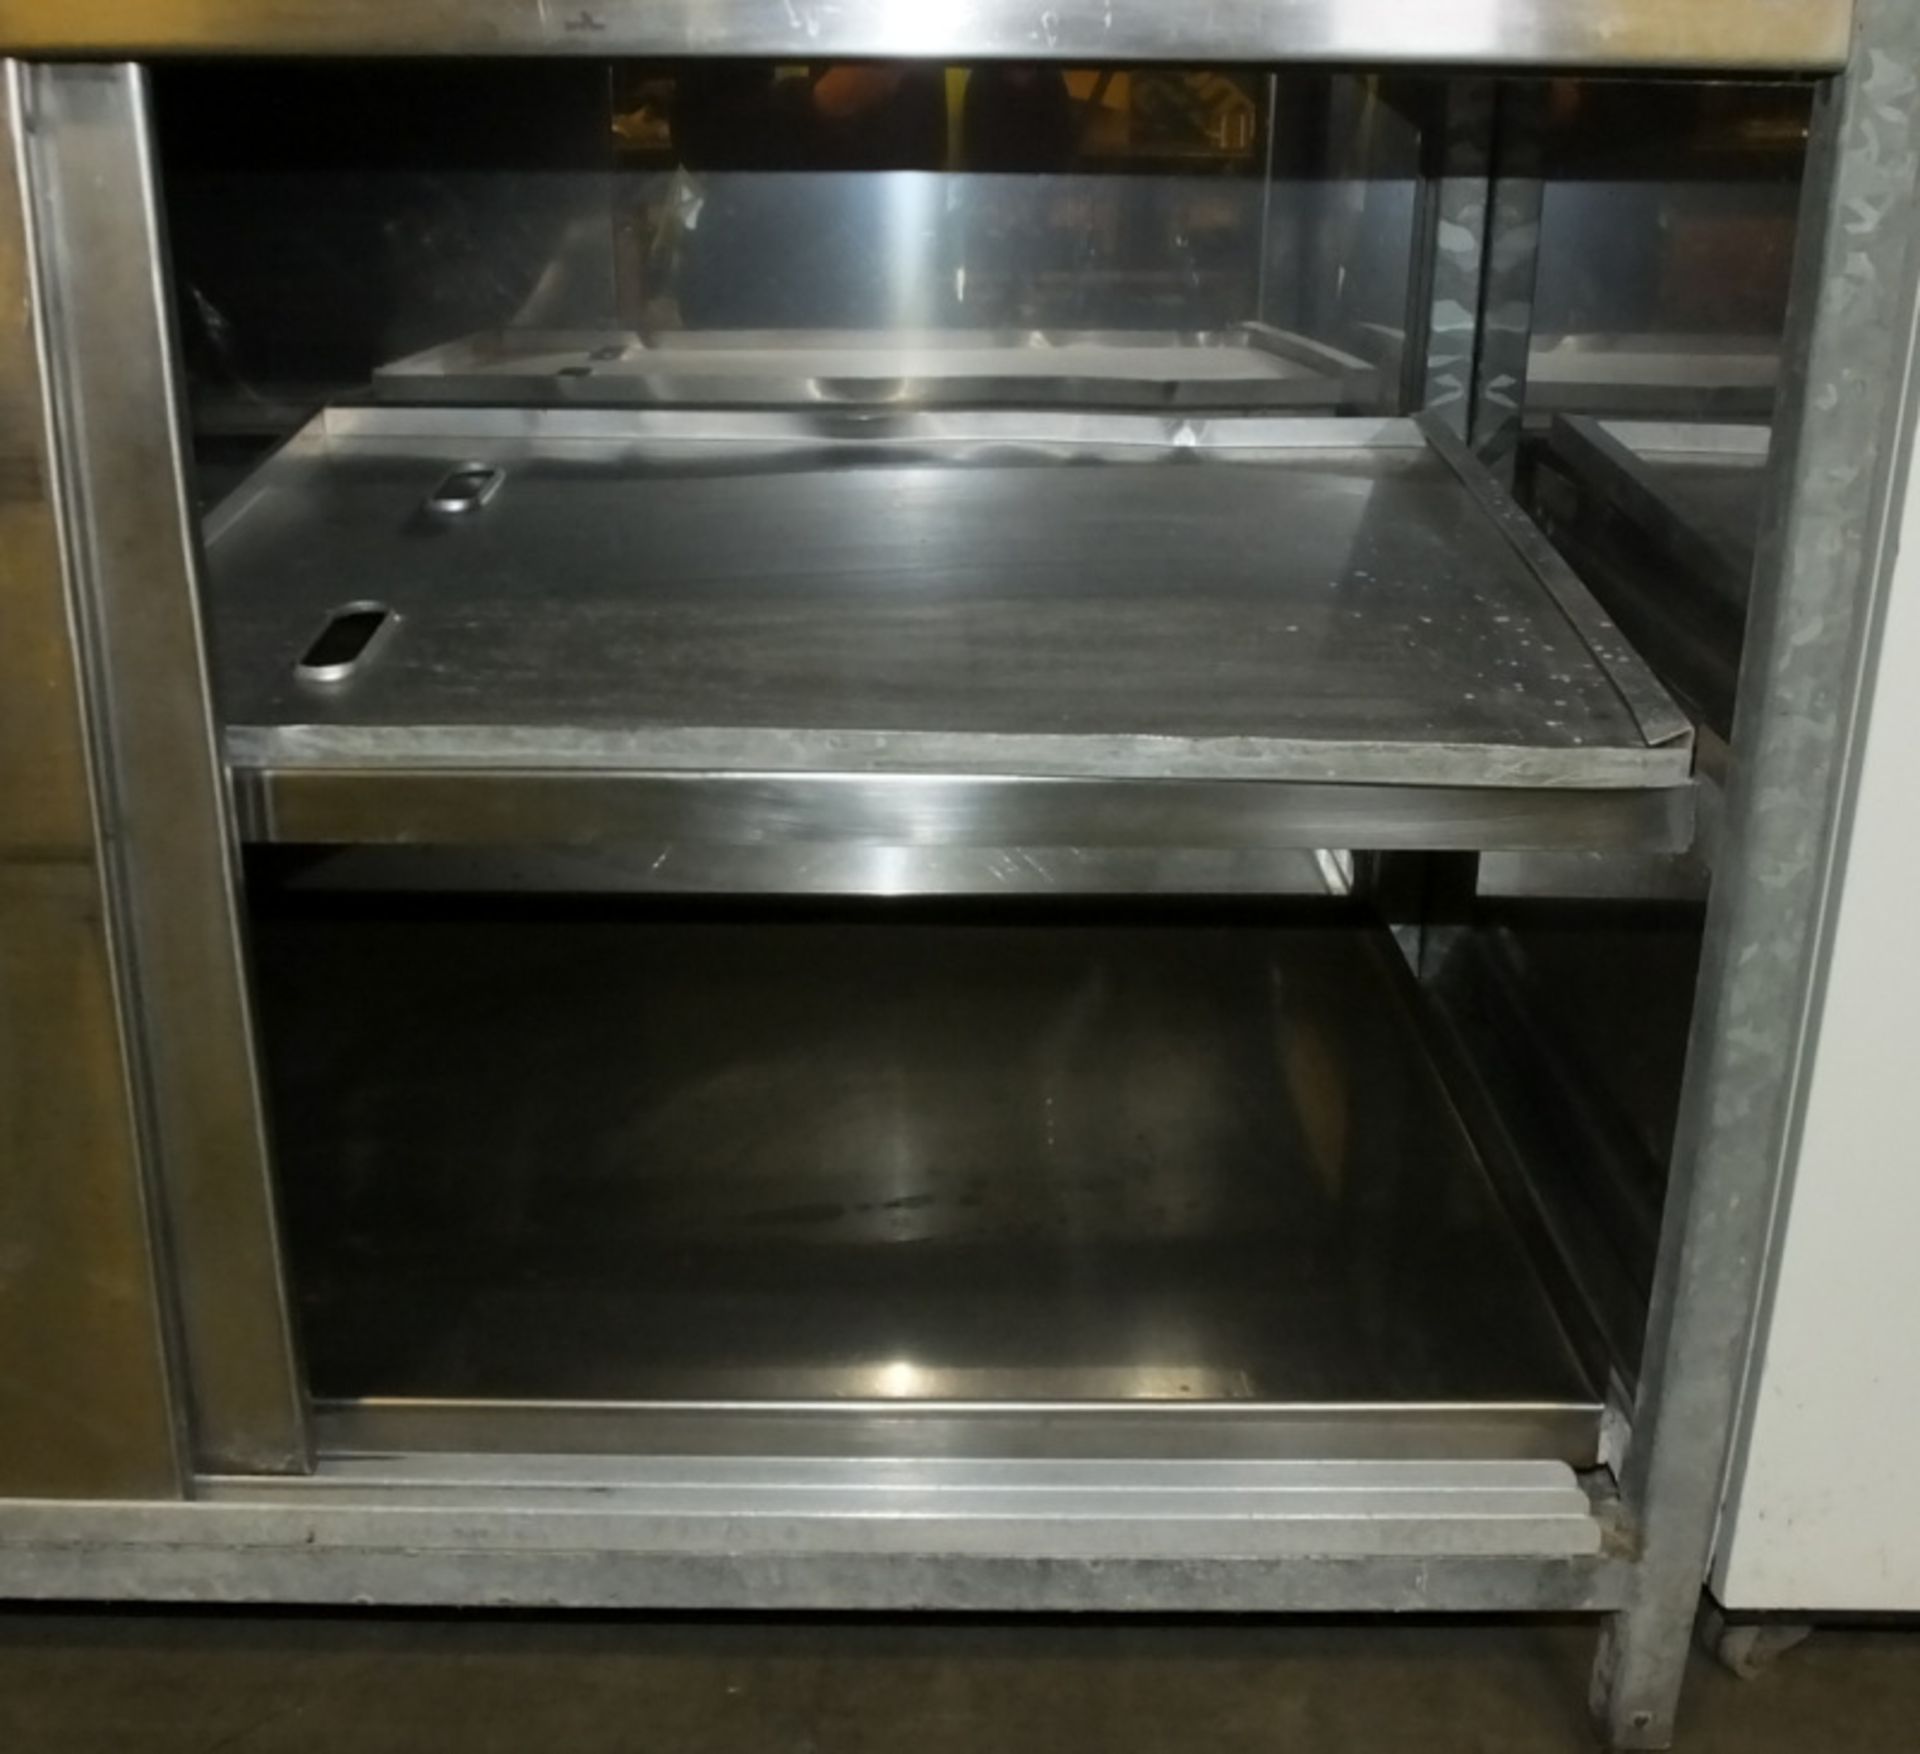 Stotts Of Oldham Stainless Steel Counter L 1530mm x W 760mm x H 900mm - Image 3 of 4